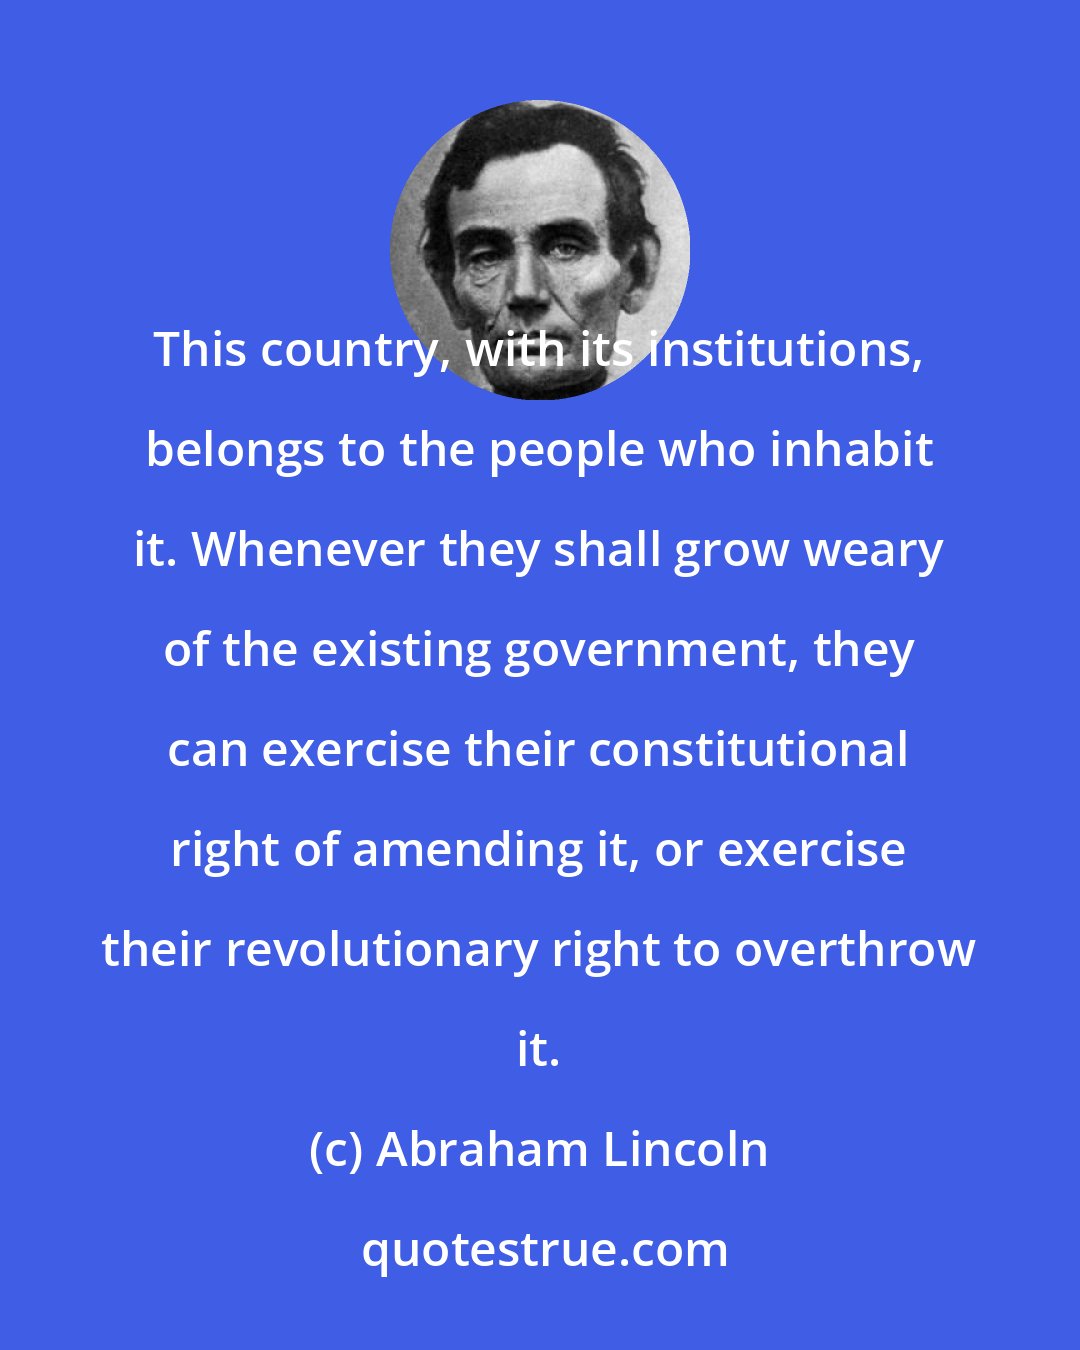 Abraham Lincoln: This country, with its institutions, belongs to the people who inhabit it. Whenever they shall grow weary of the existing government, they can exercise their constitutional right of amending it, or exercise their revolutionary right to overthrow it.